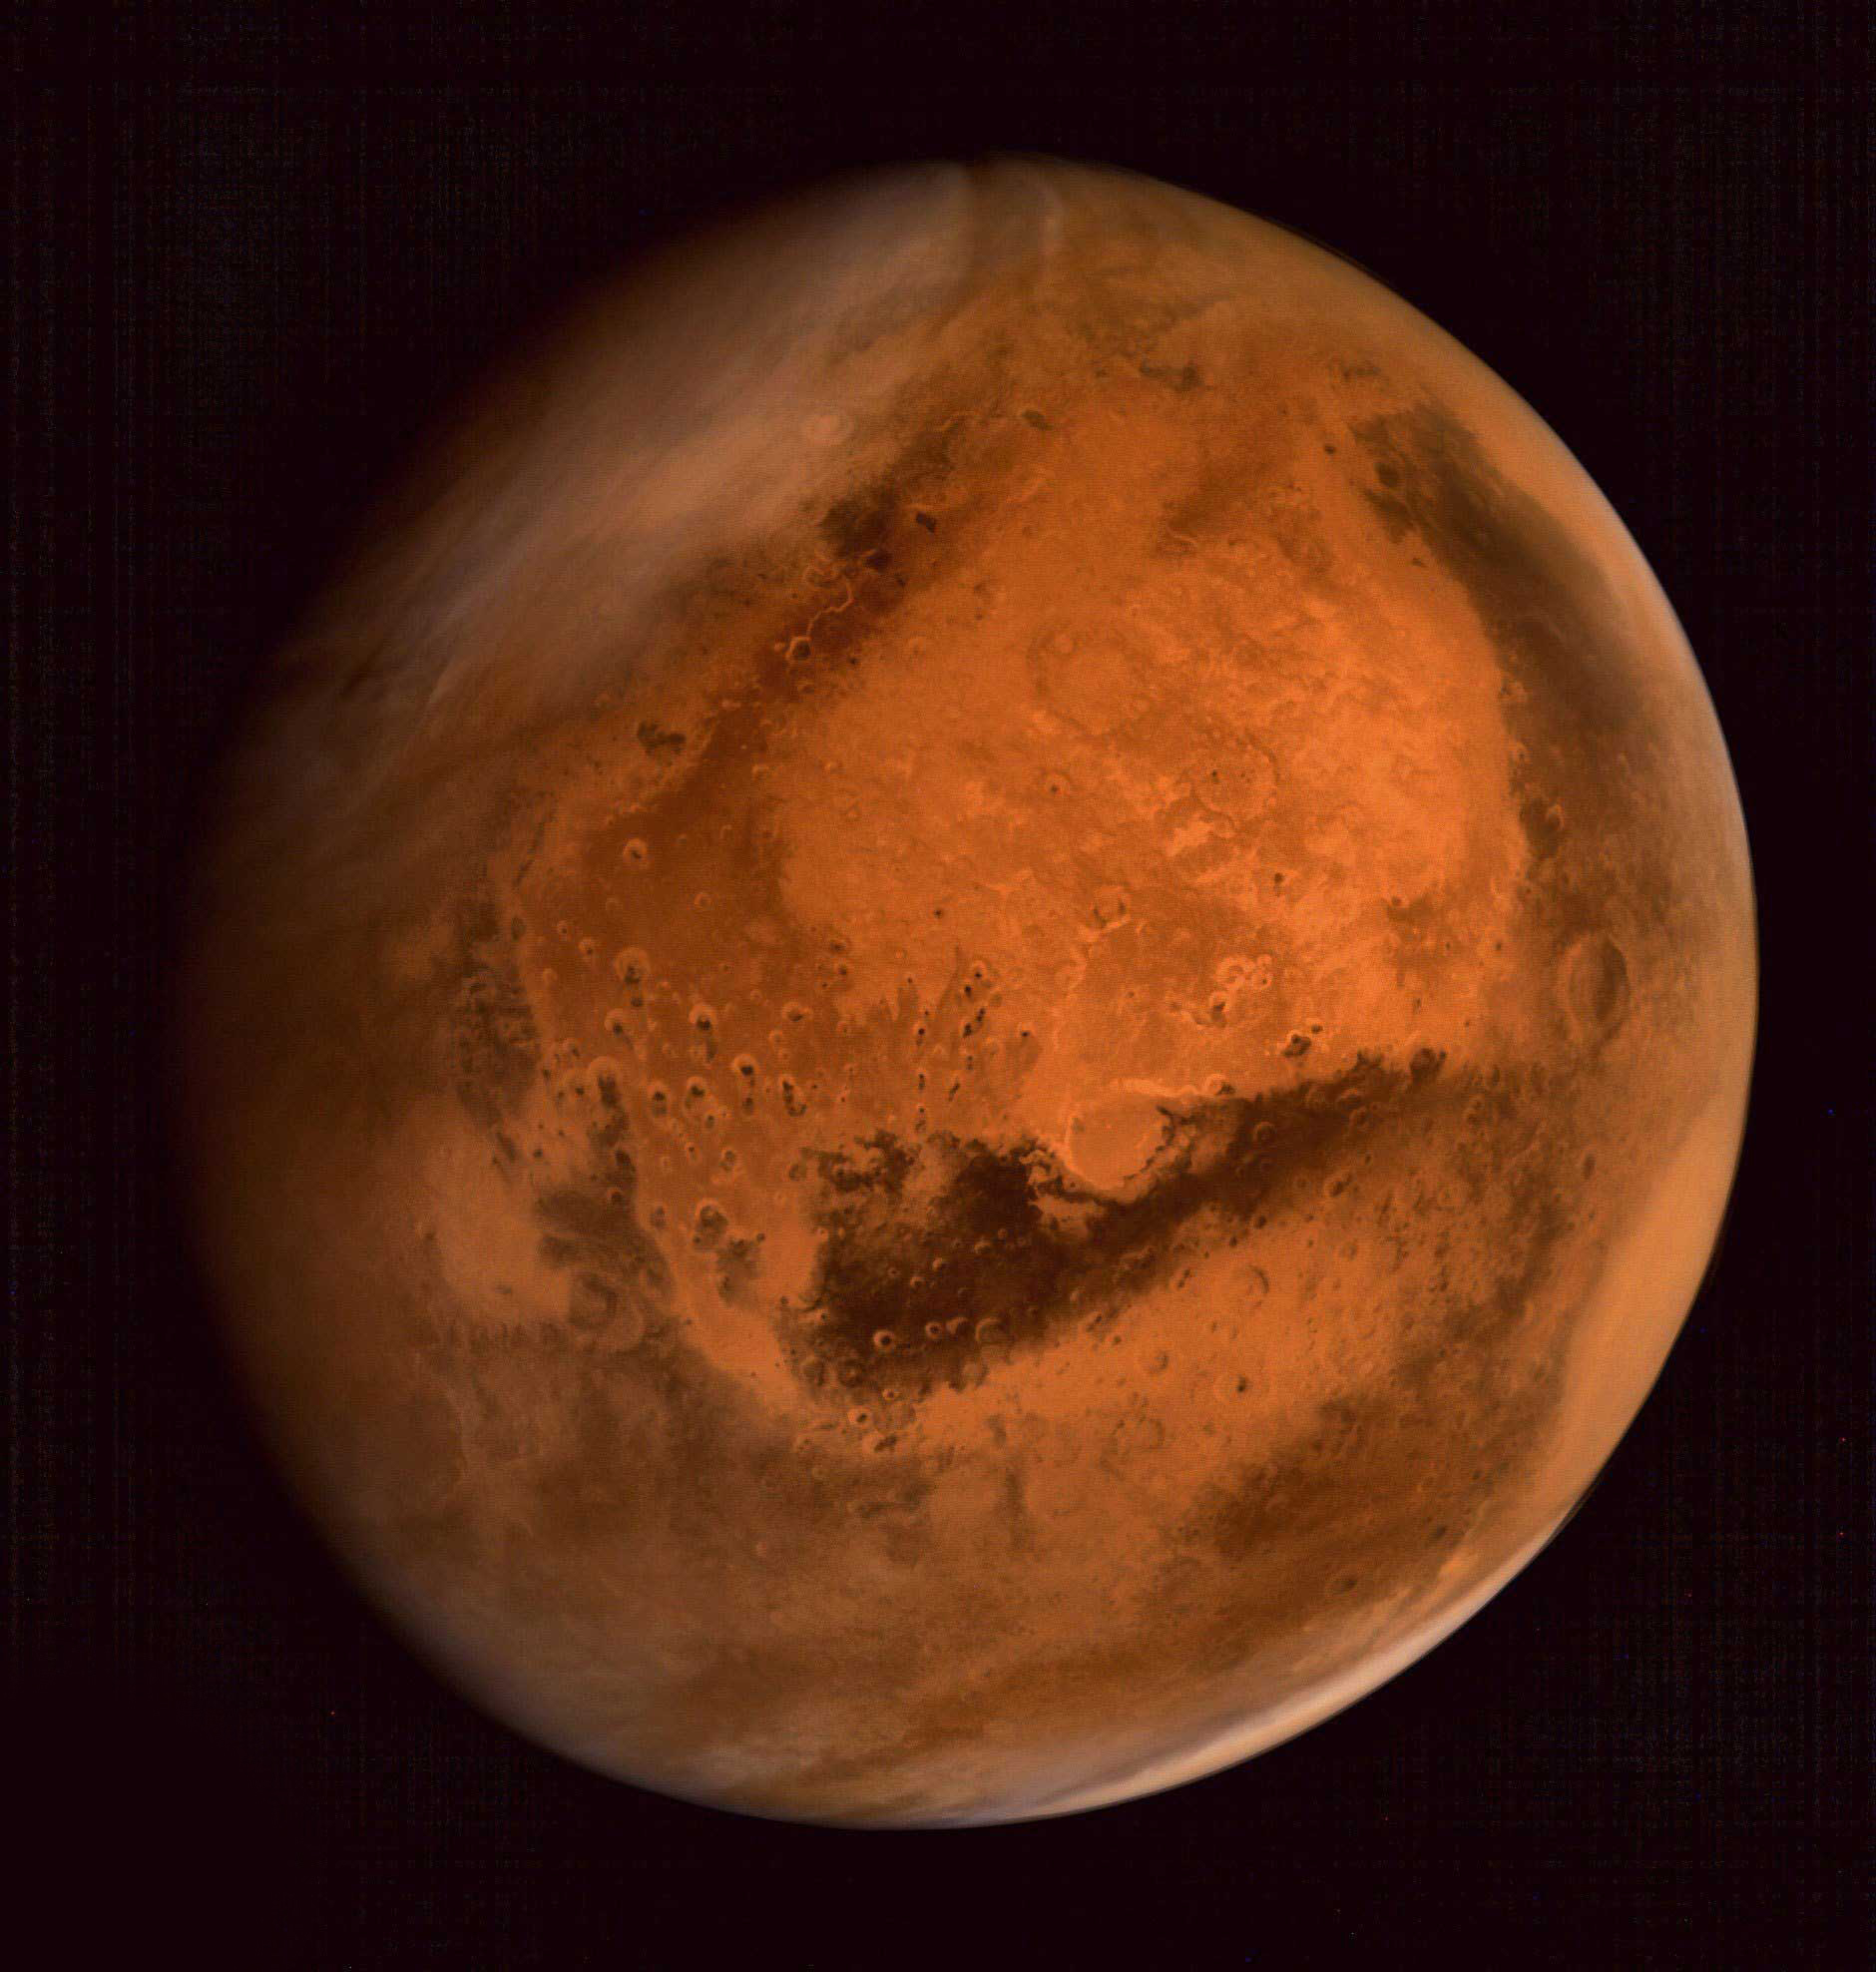 Mars is seen in an image taken by the ISRO Mars Orbiter Mission (MOM) spacecraft released on Sept. 30, 2014.